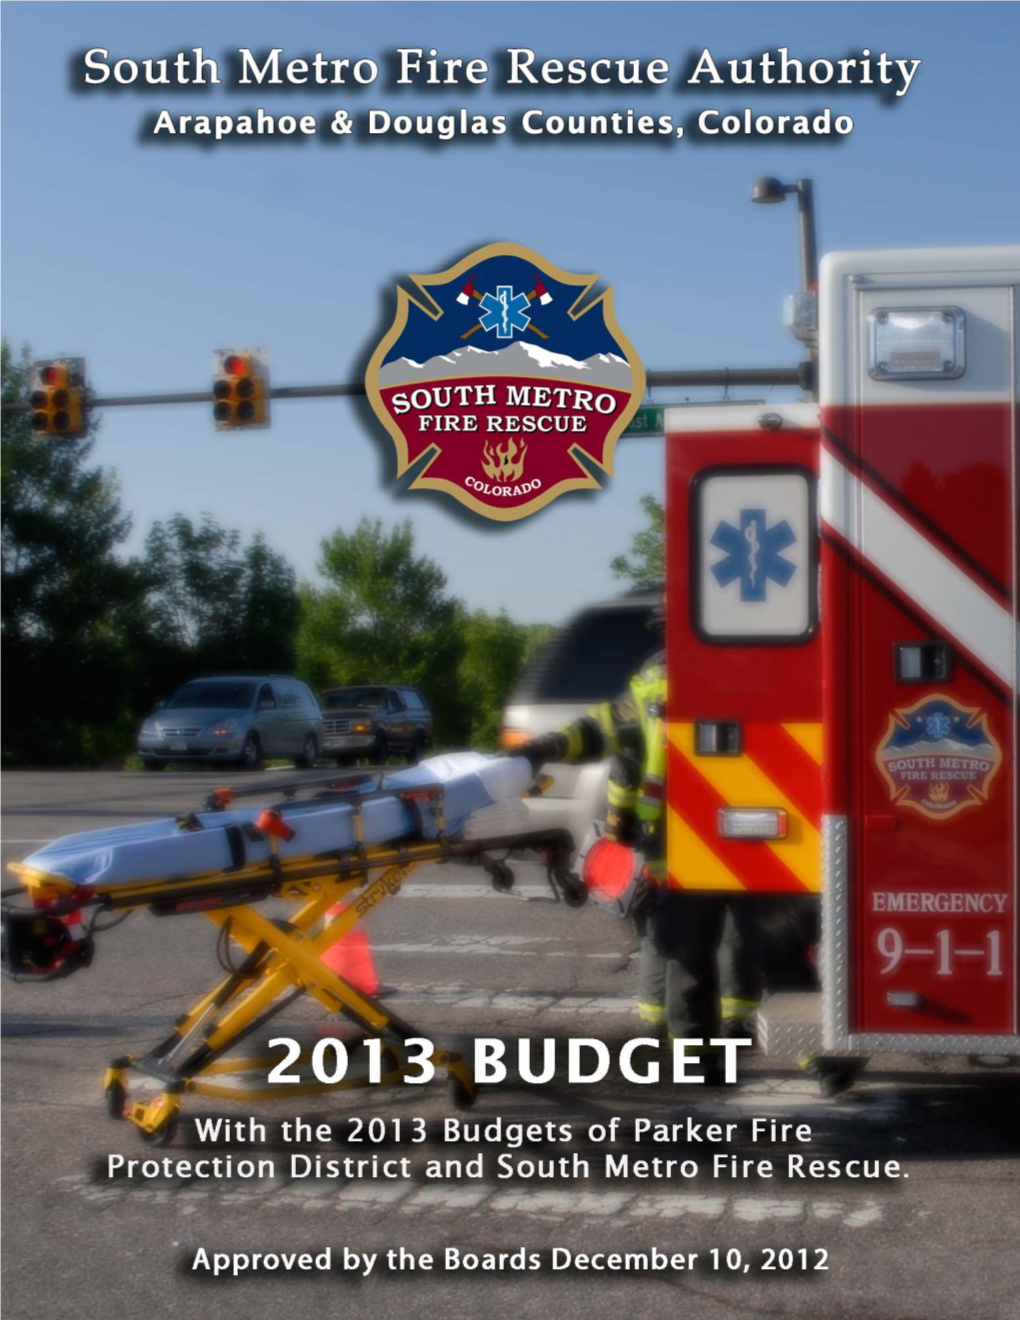 2013 Budgeted Revenues Totaling $582,500 Include Reimbursements for Services Such As Hazardous Materials Incidents, Wildfire Callouts, and the SWAT Team